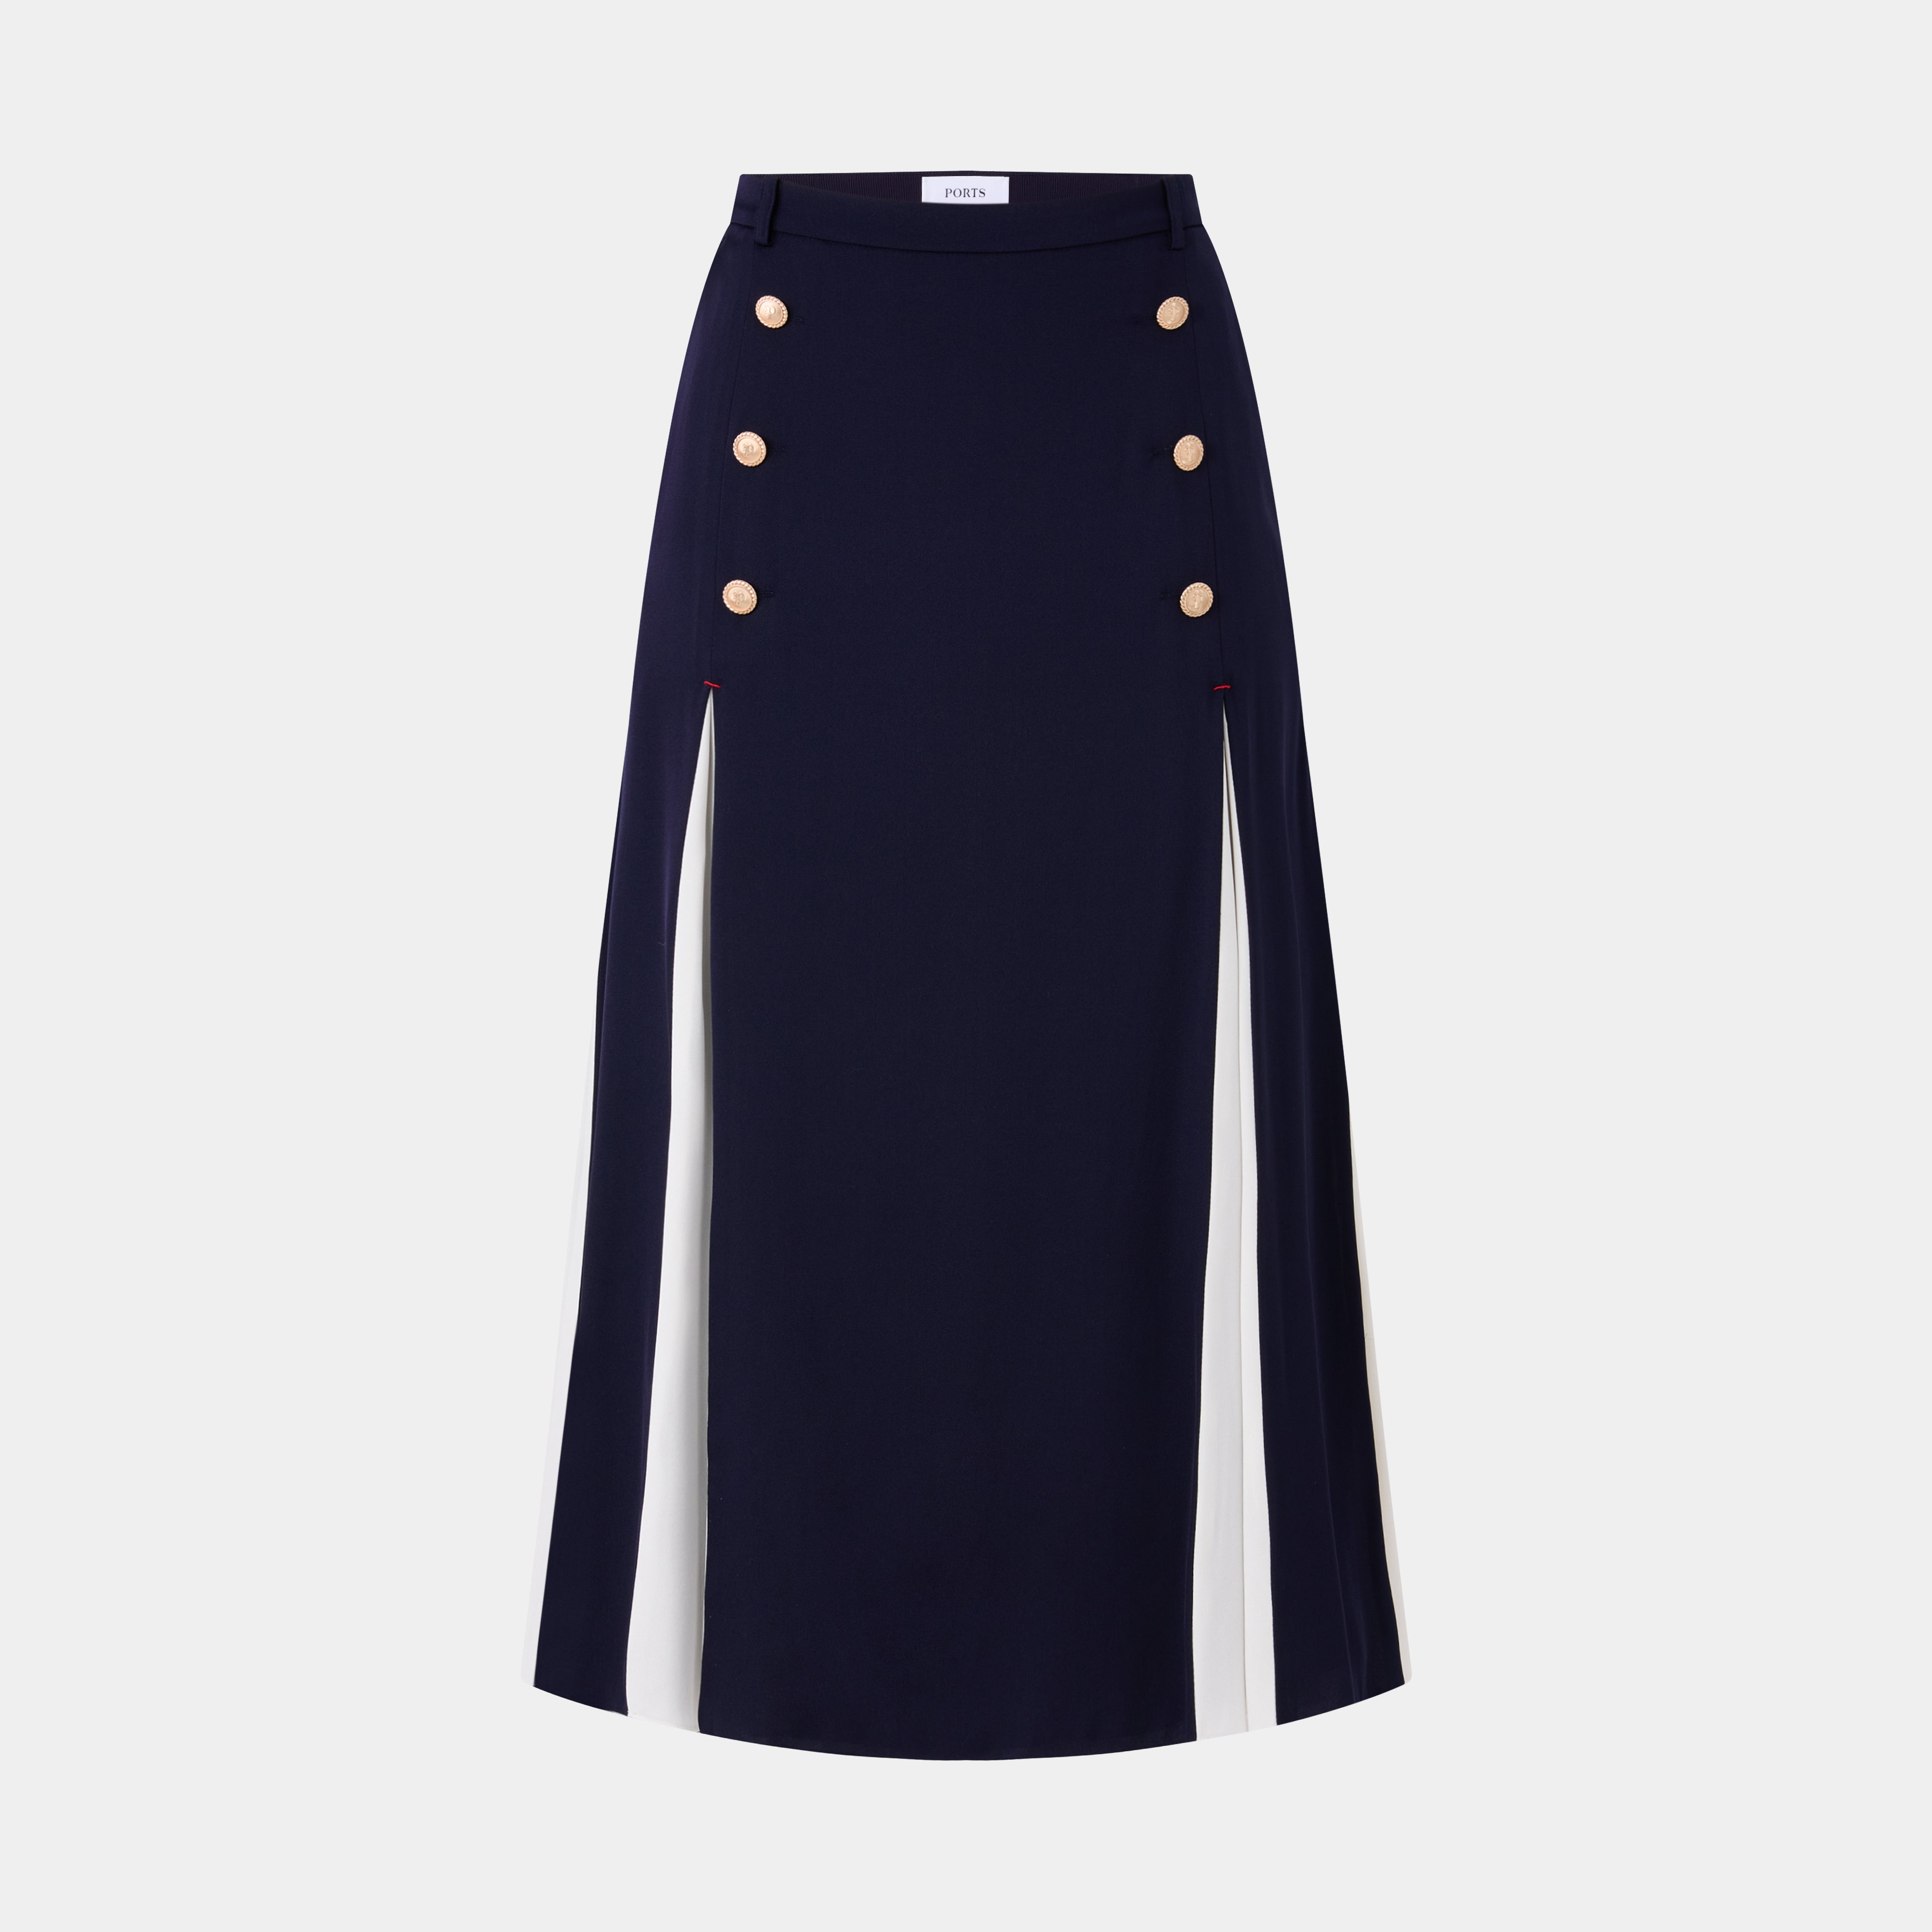 White and Navy Contrast Silk Skirt